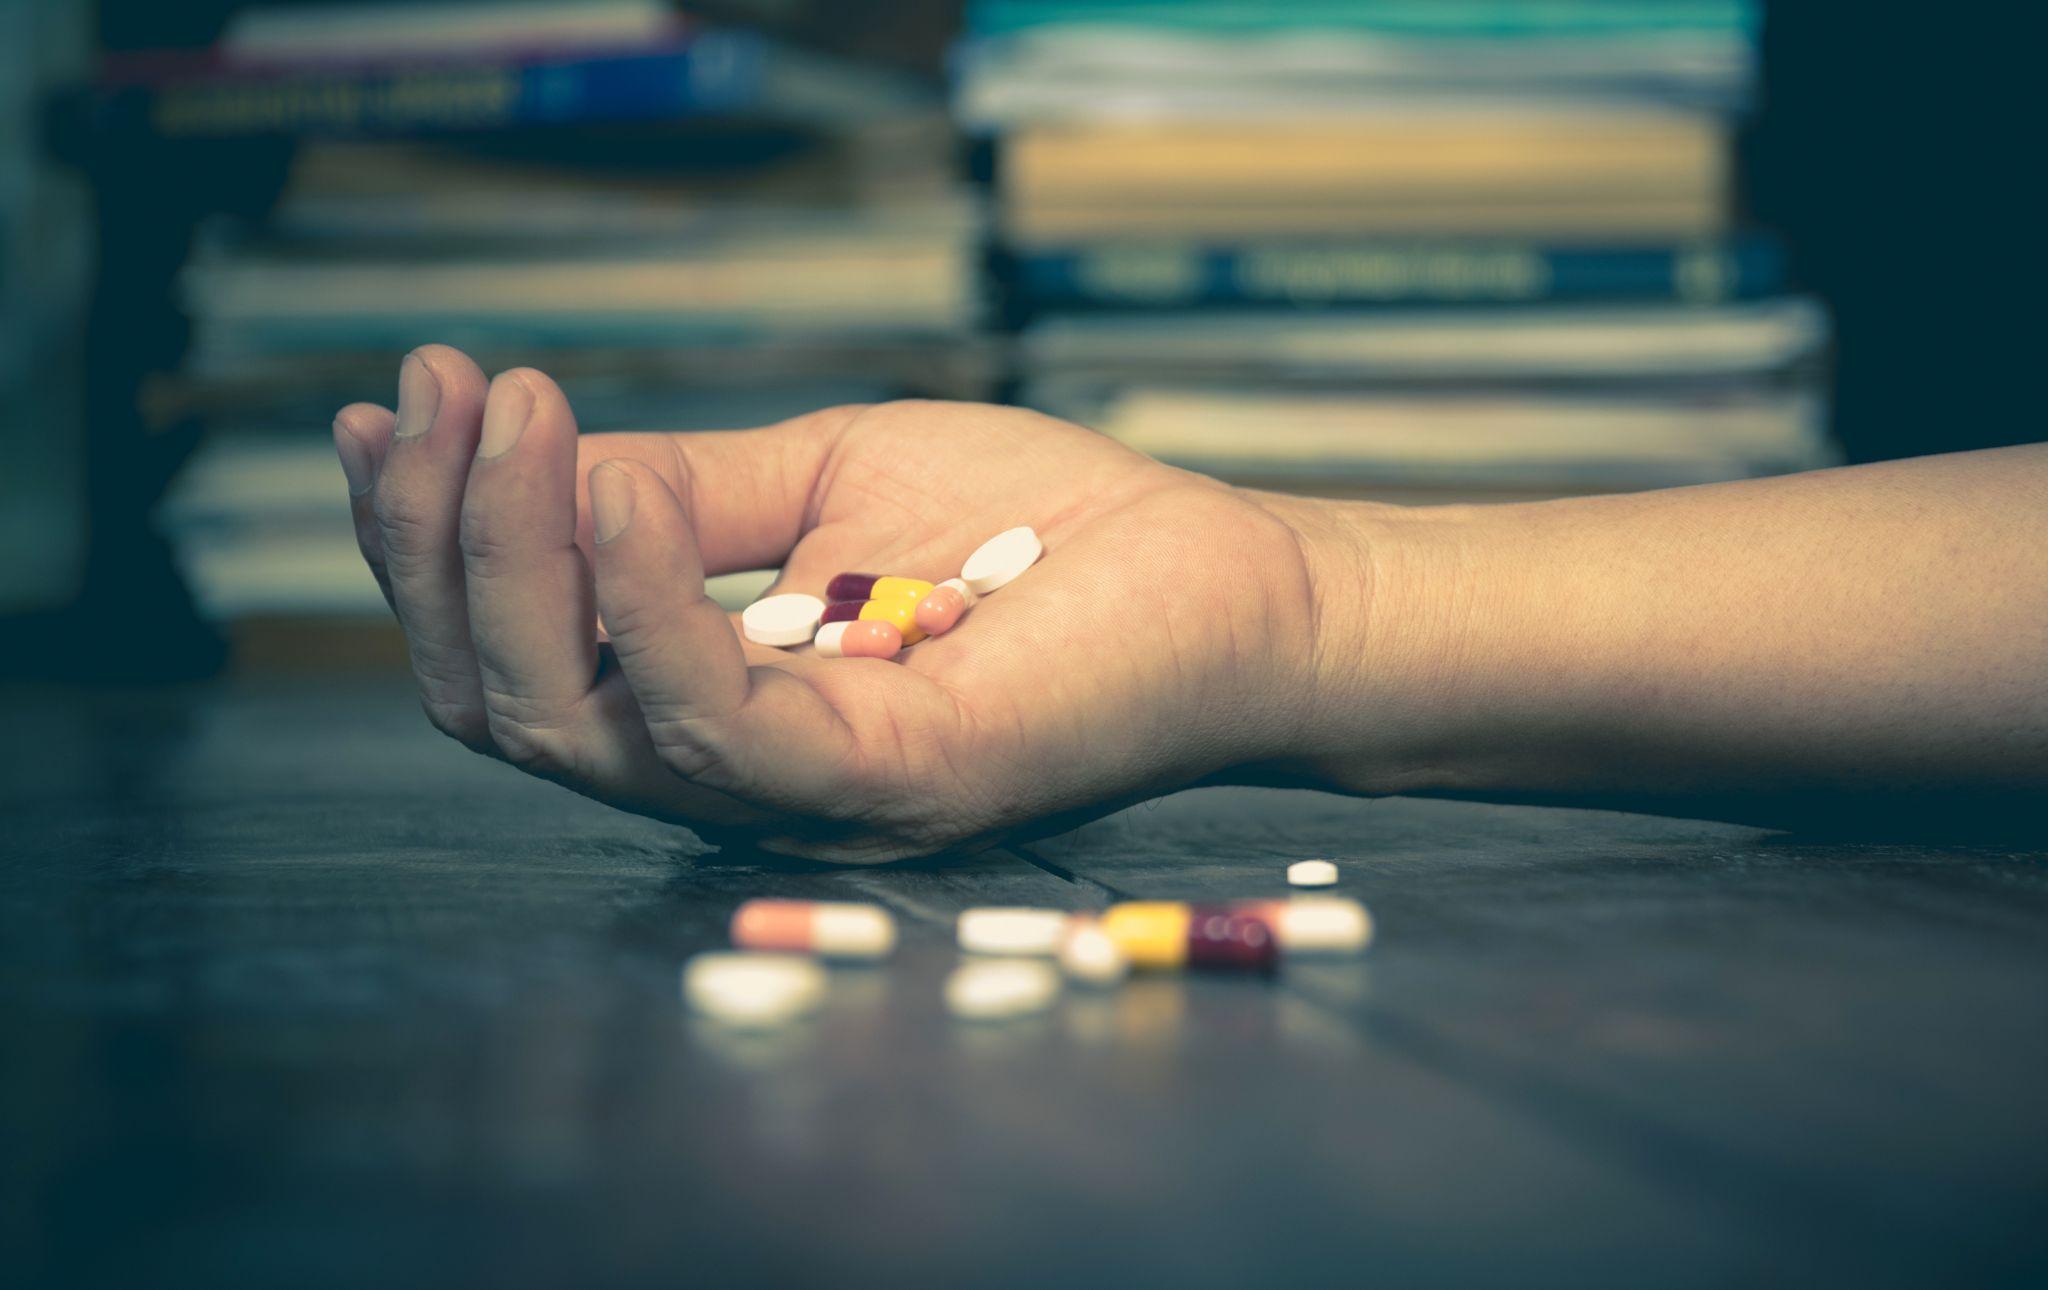 The Man Committing Suicide By Overdosing On Medication